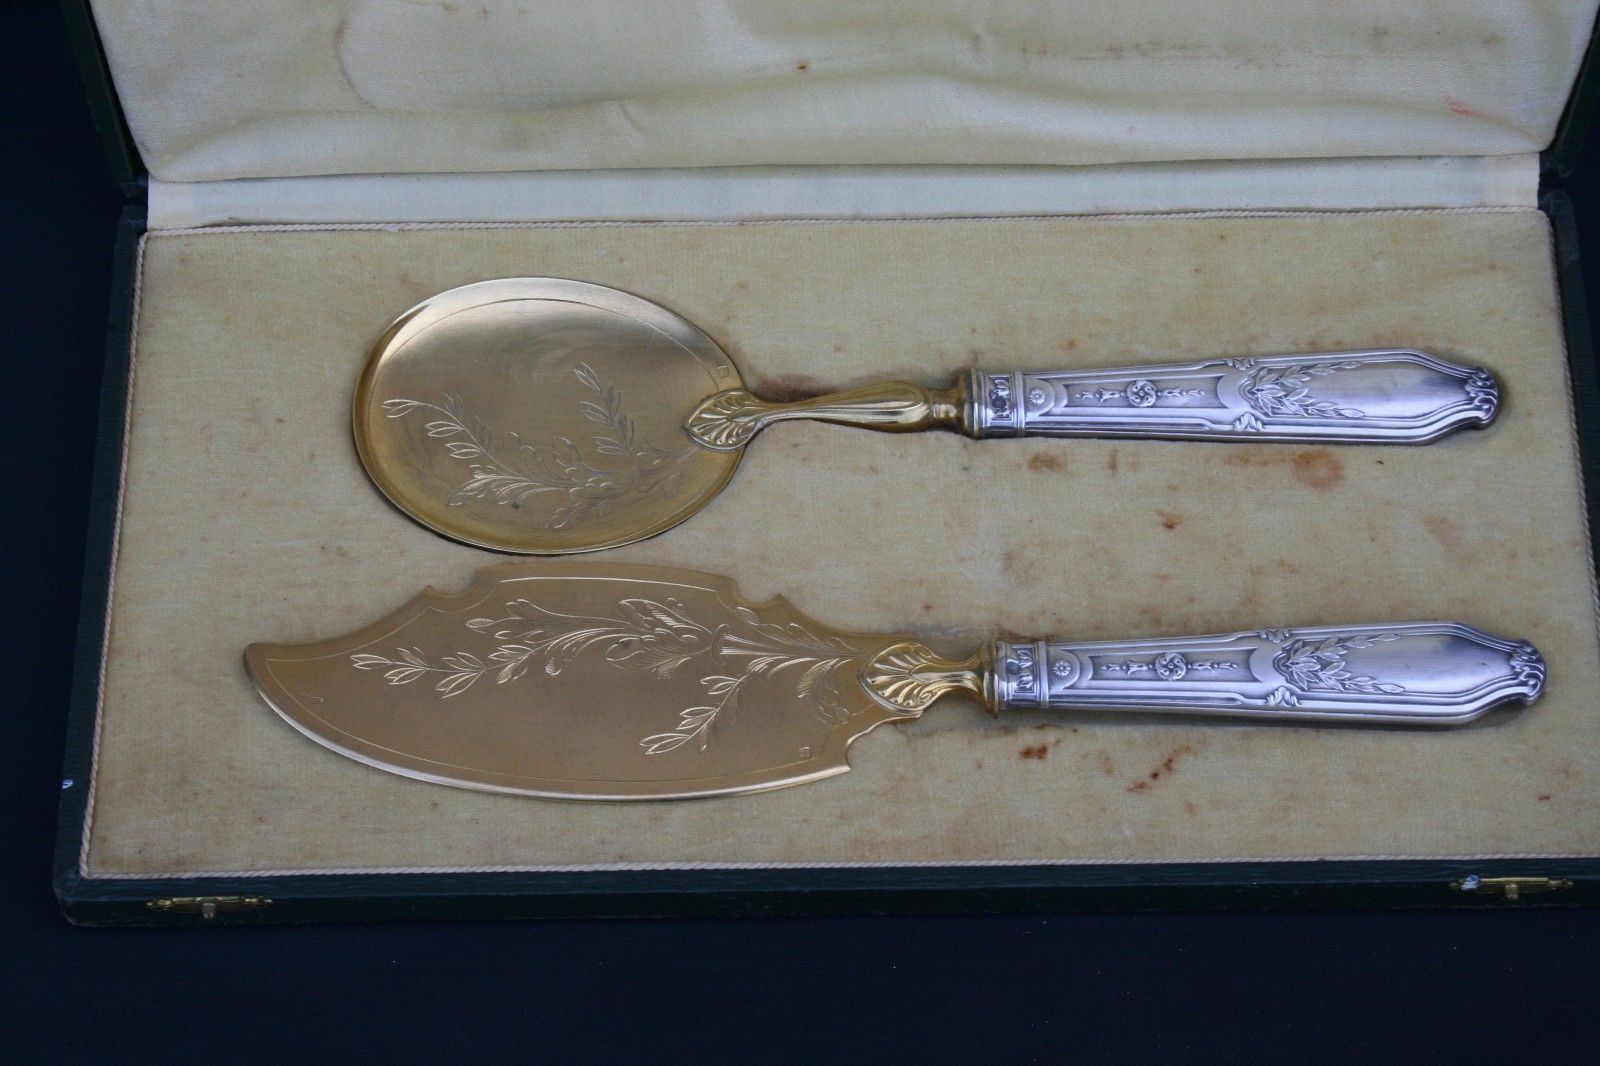 ANTIQUE FRENCH ICE CREAM / CAKE SERVING SET 2 PCS IN BOX STERLING SILVER HANDLES